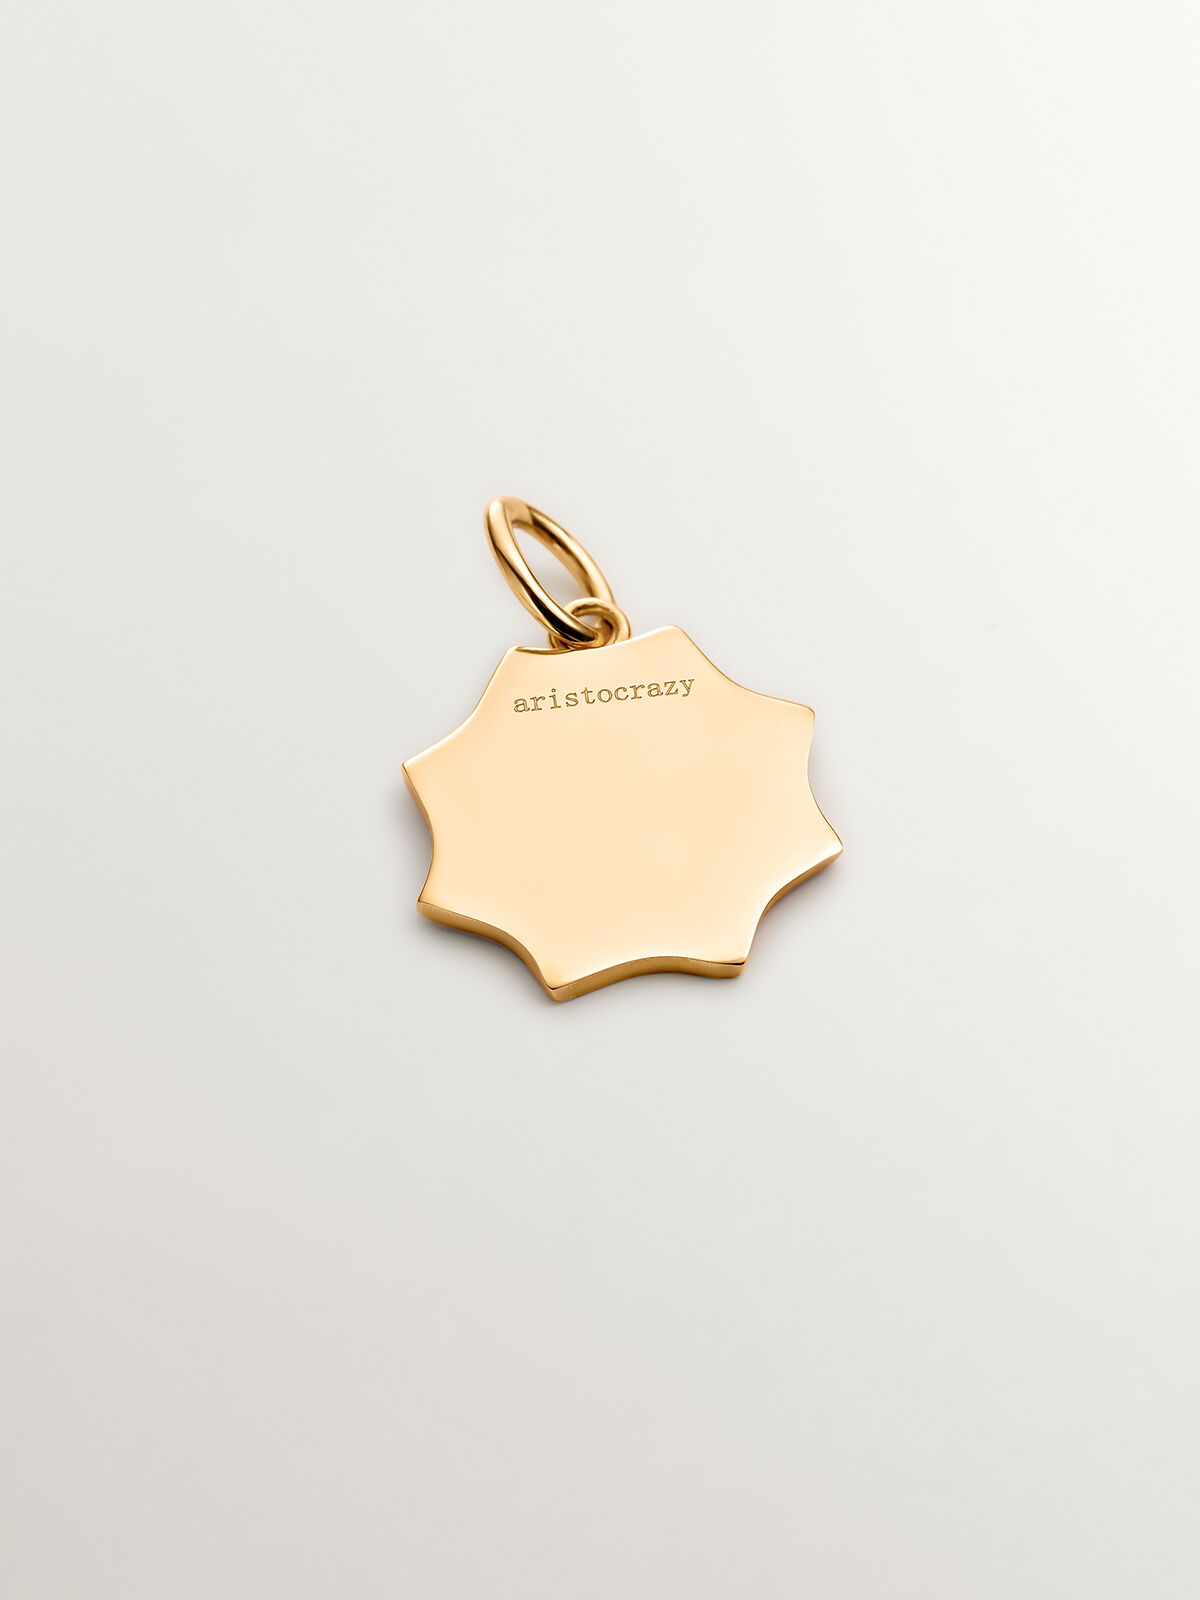 18K yellow gold plated 925 sterling silver charm with star-shaped